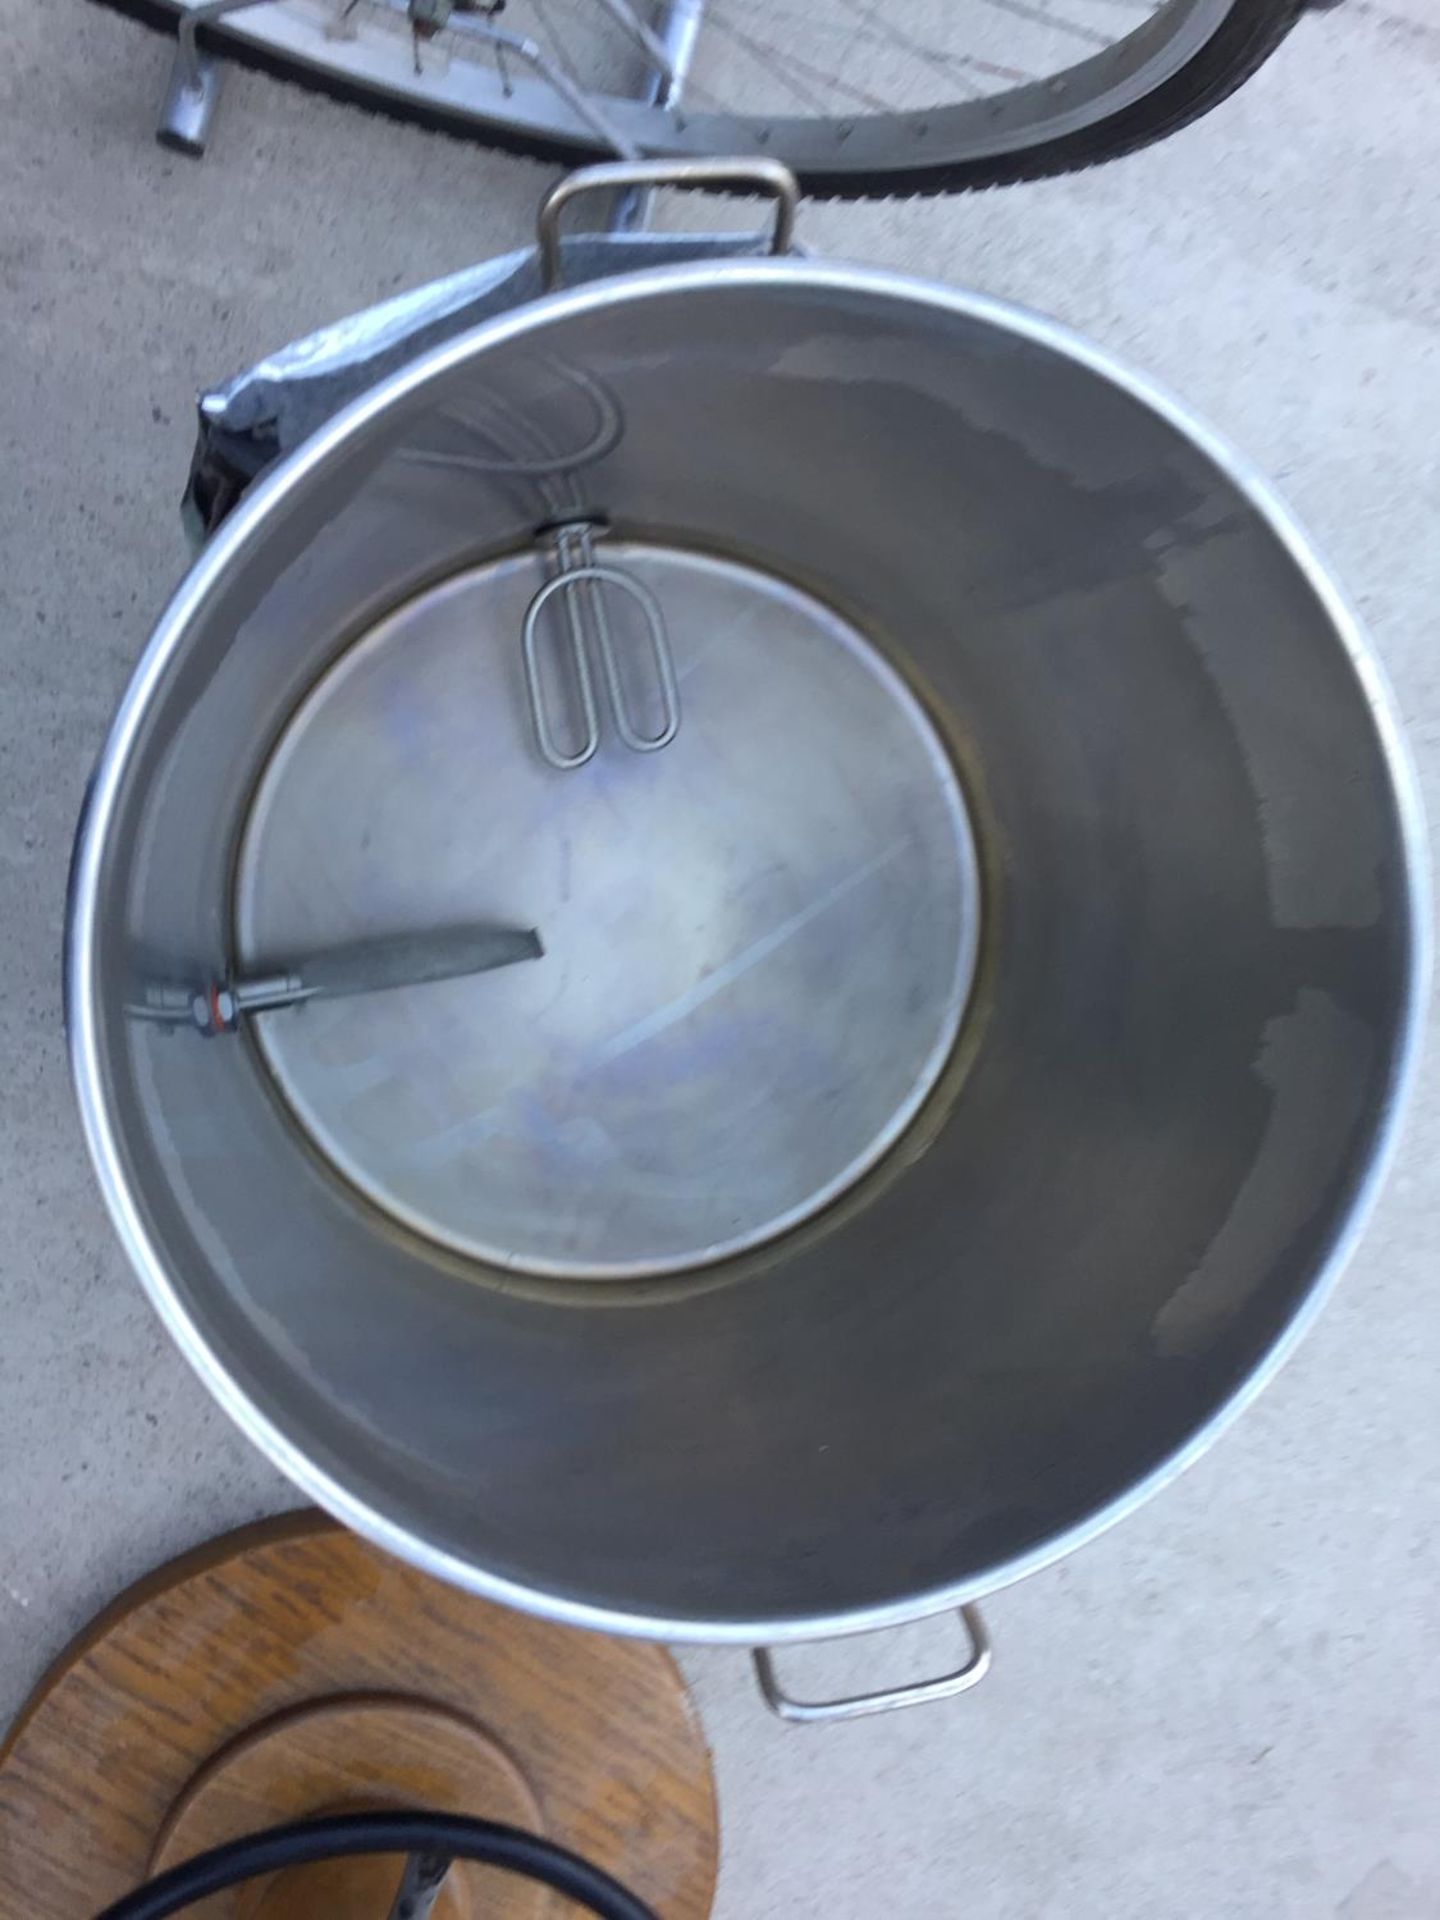 A LARGE STAINLESS STEEL COOKING POT - Image 5 of 6